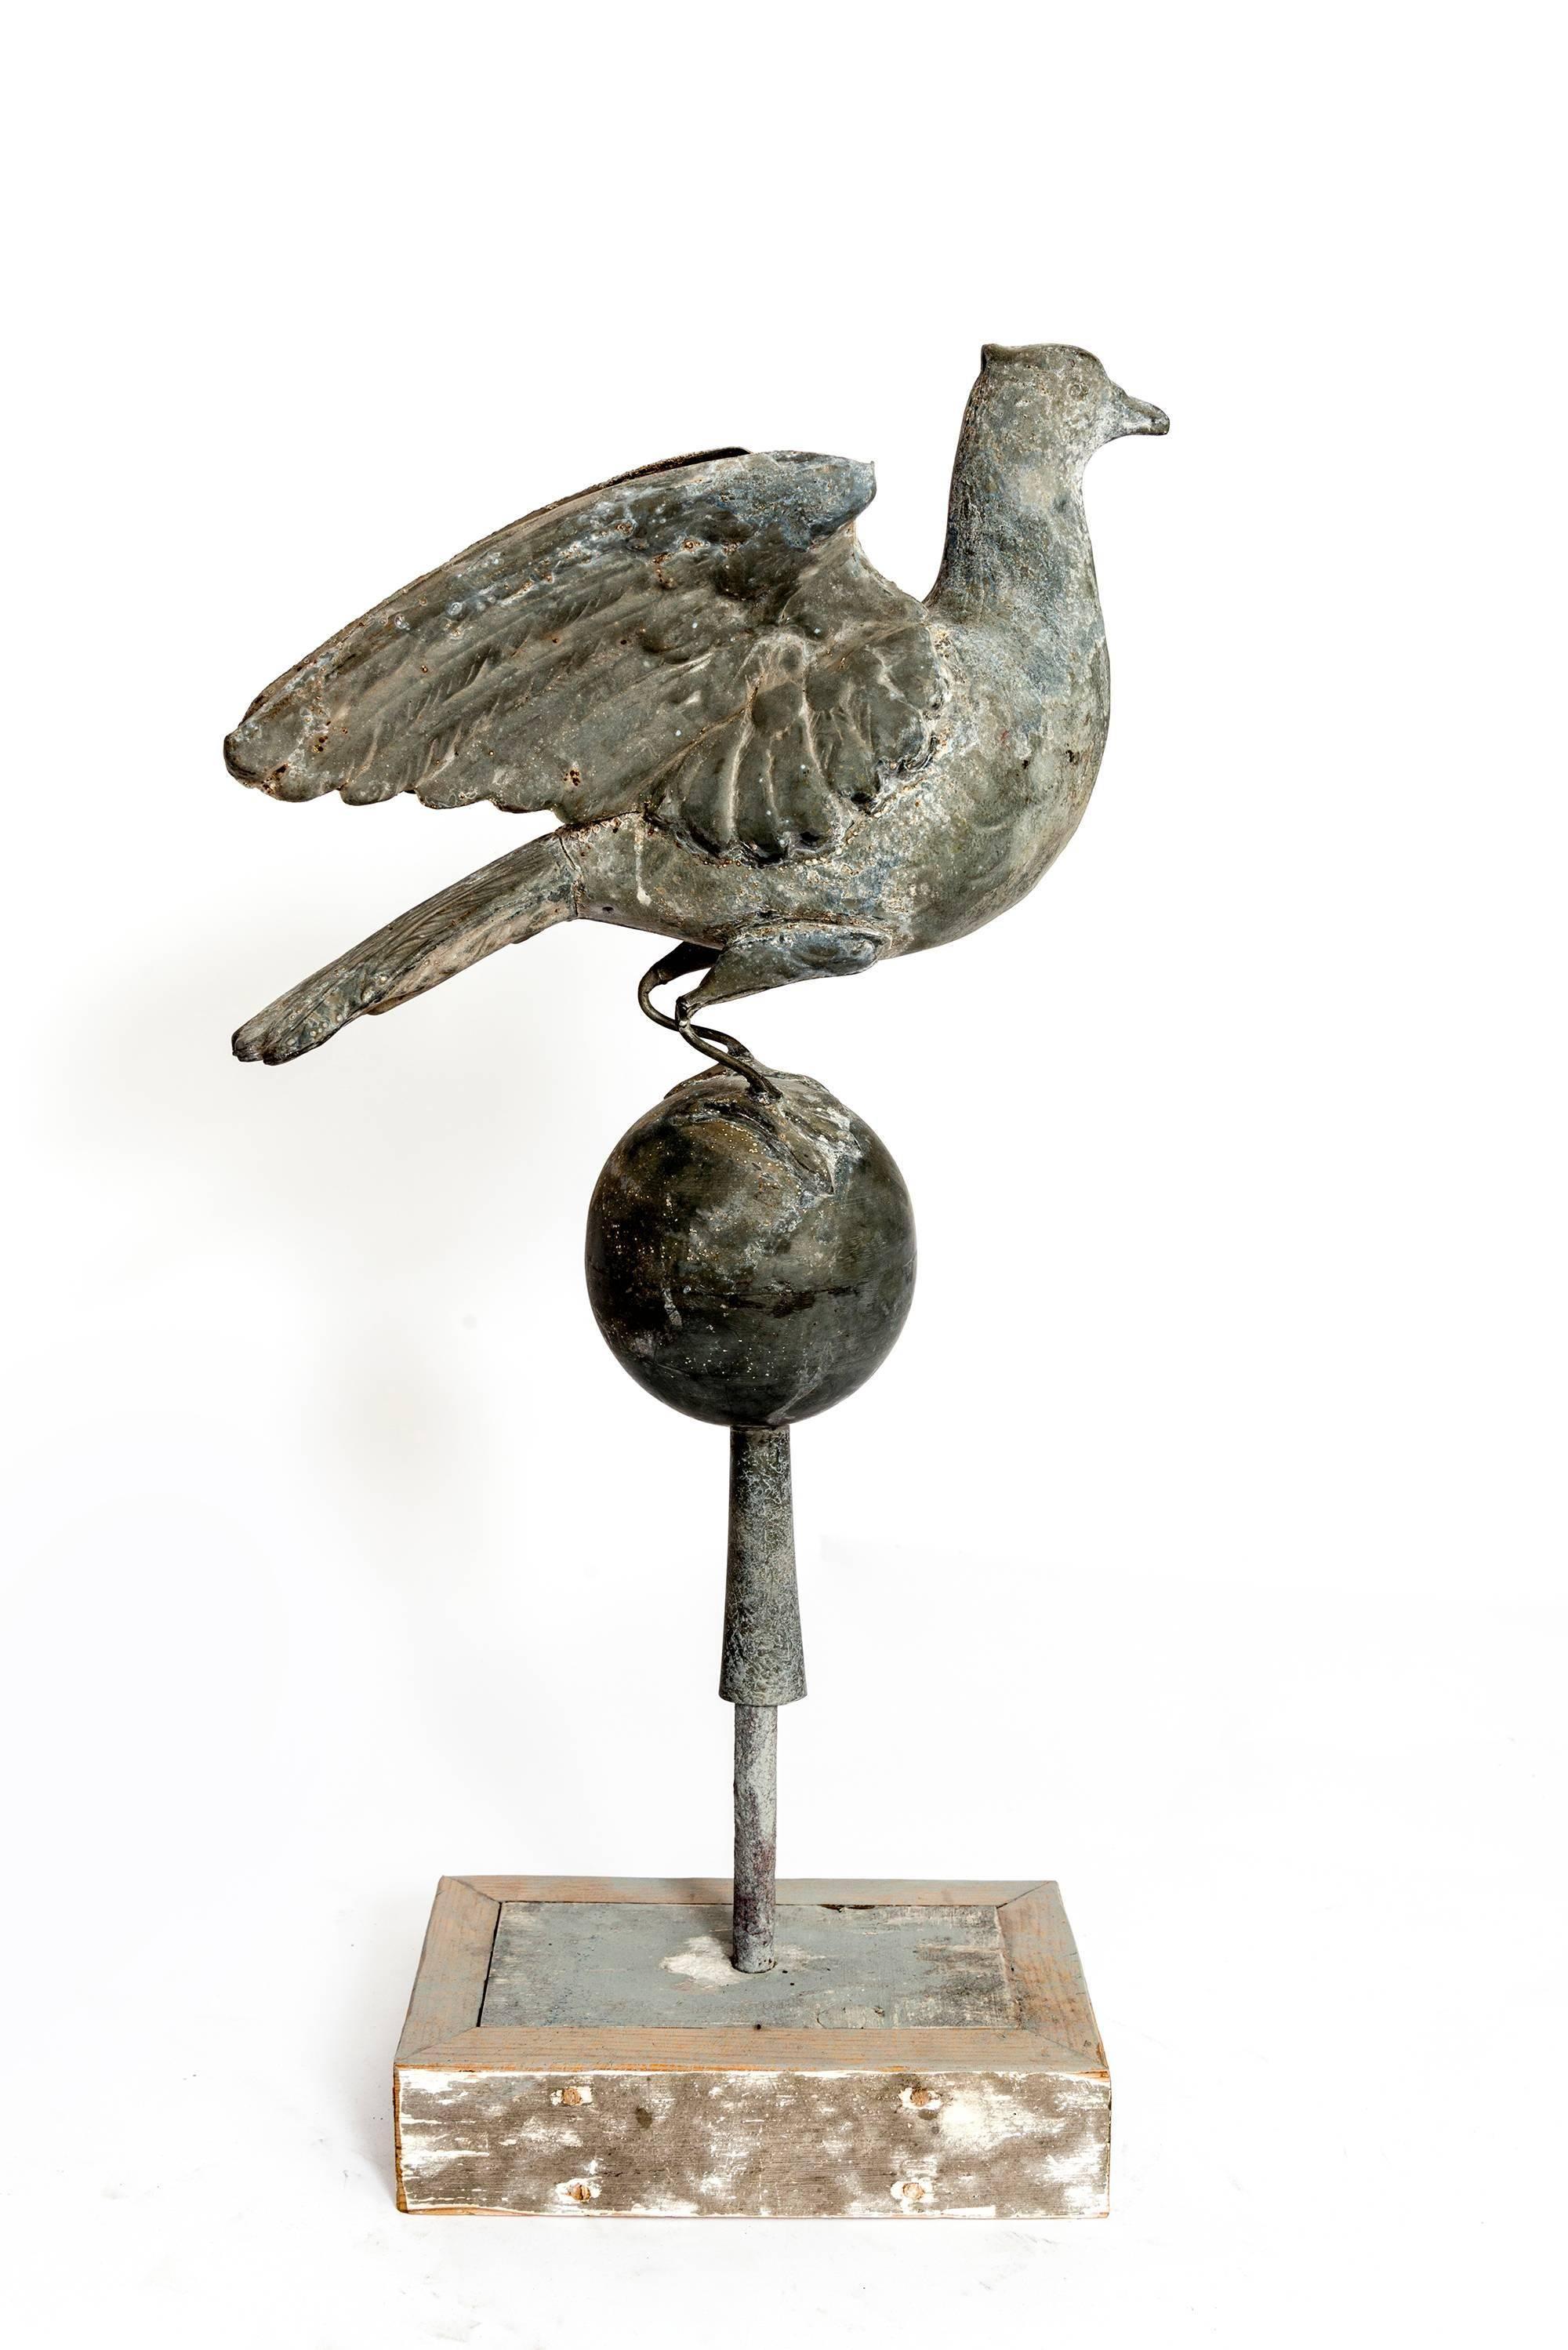 A wonderful rendition of a bird sitting atop and globe and set on a wooden stand. Great detail and patina of this vintage decoration.